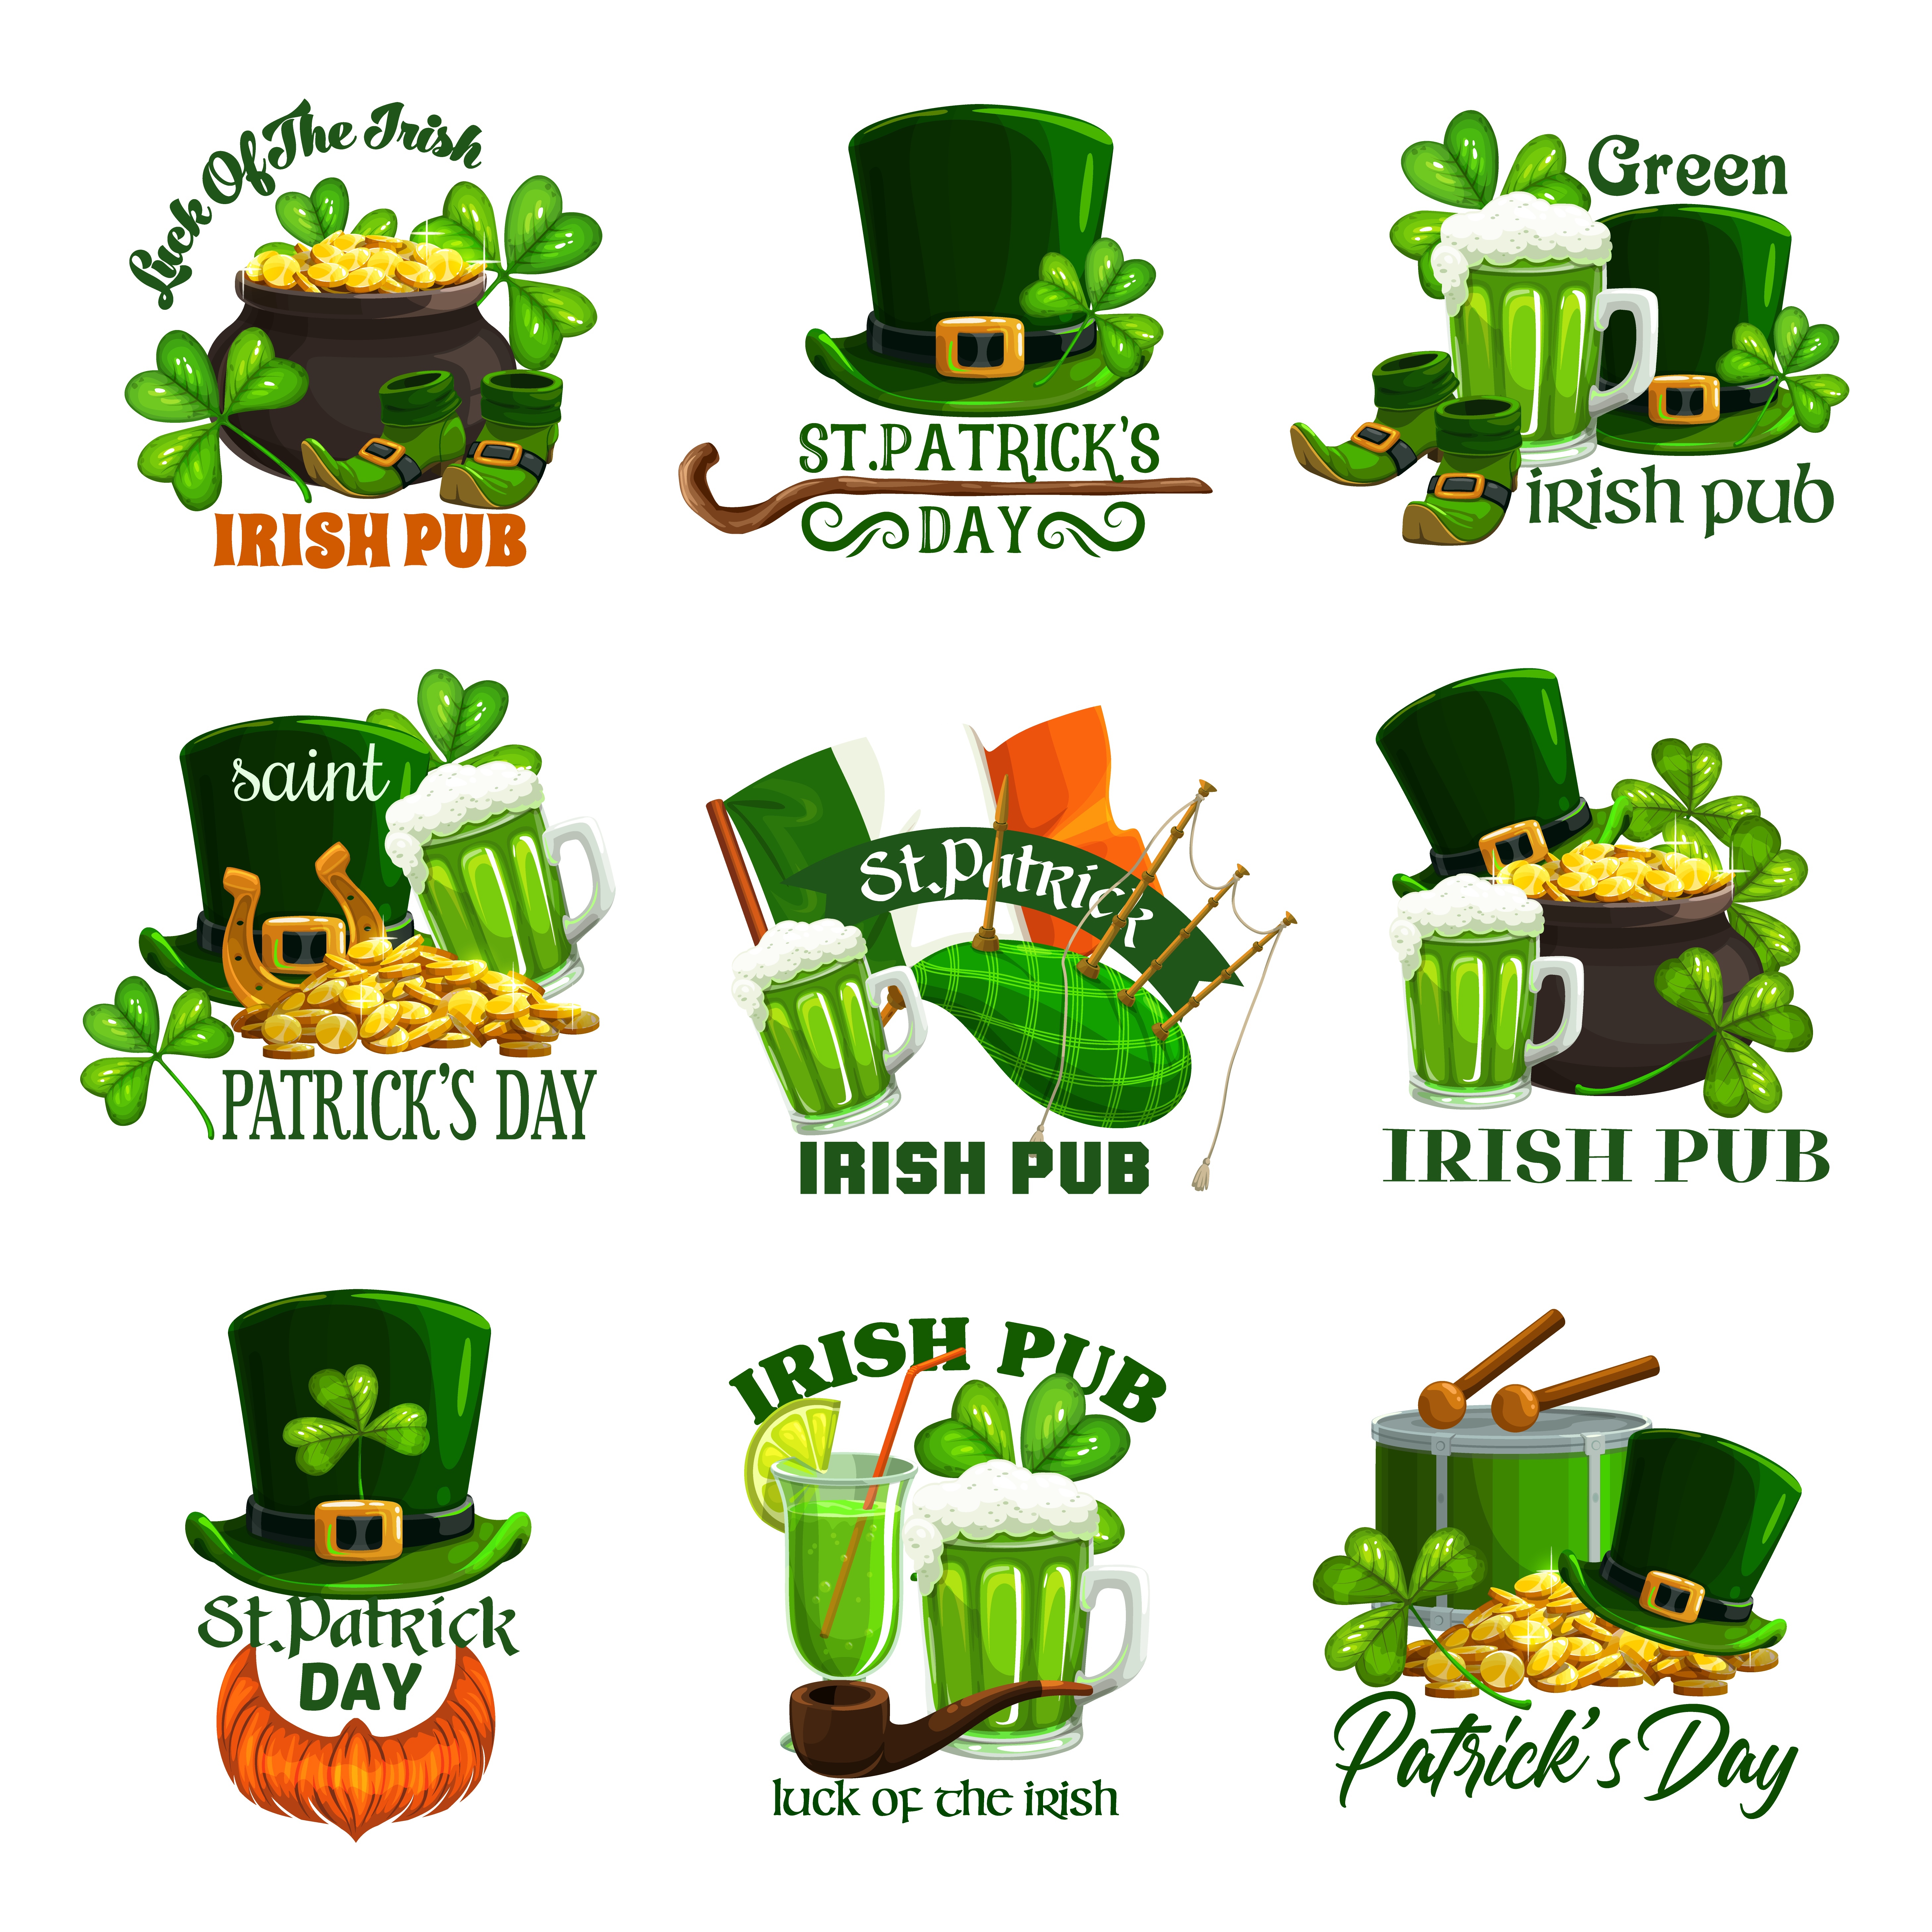 St Patricks Day holiday isolated vector icons. Irish pub green beer, clovers, leprechaun gold pots and hats, golden coins, shamrock leaves and lucky horseshoe, Ireland flag and treasure cauldron. St Patricks Day holiday icons of Irish pub party